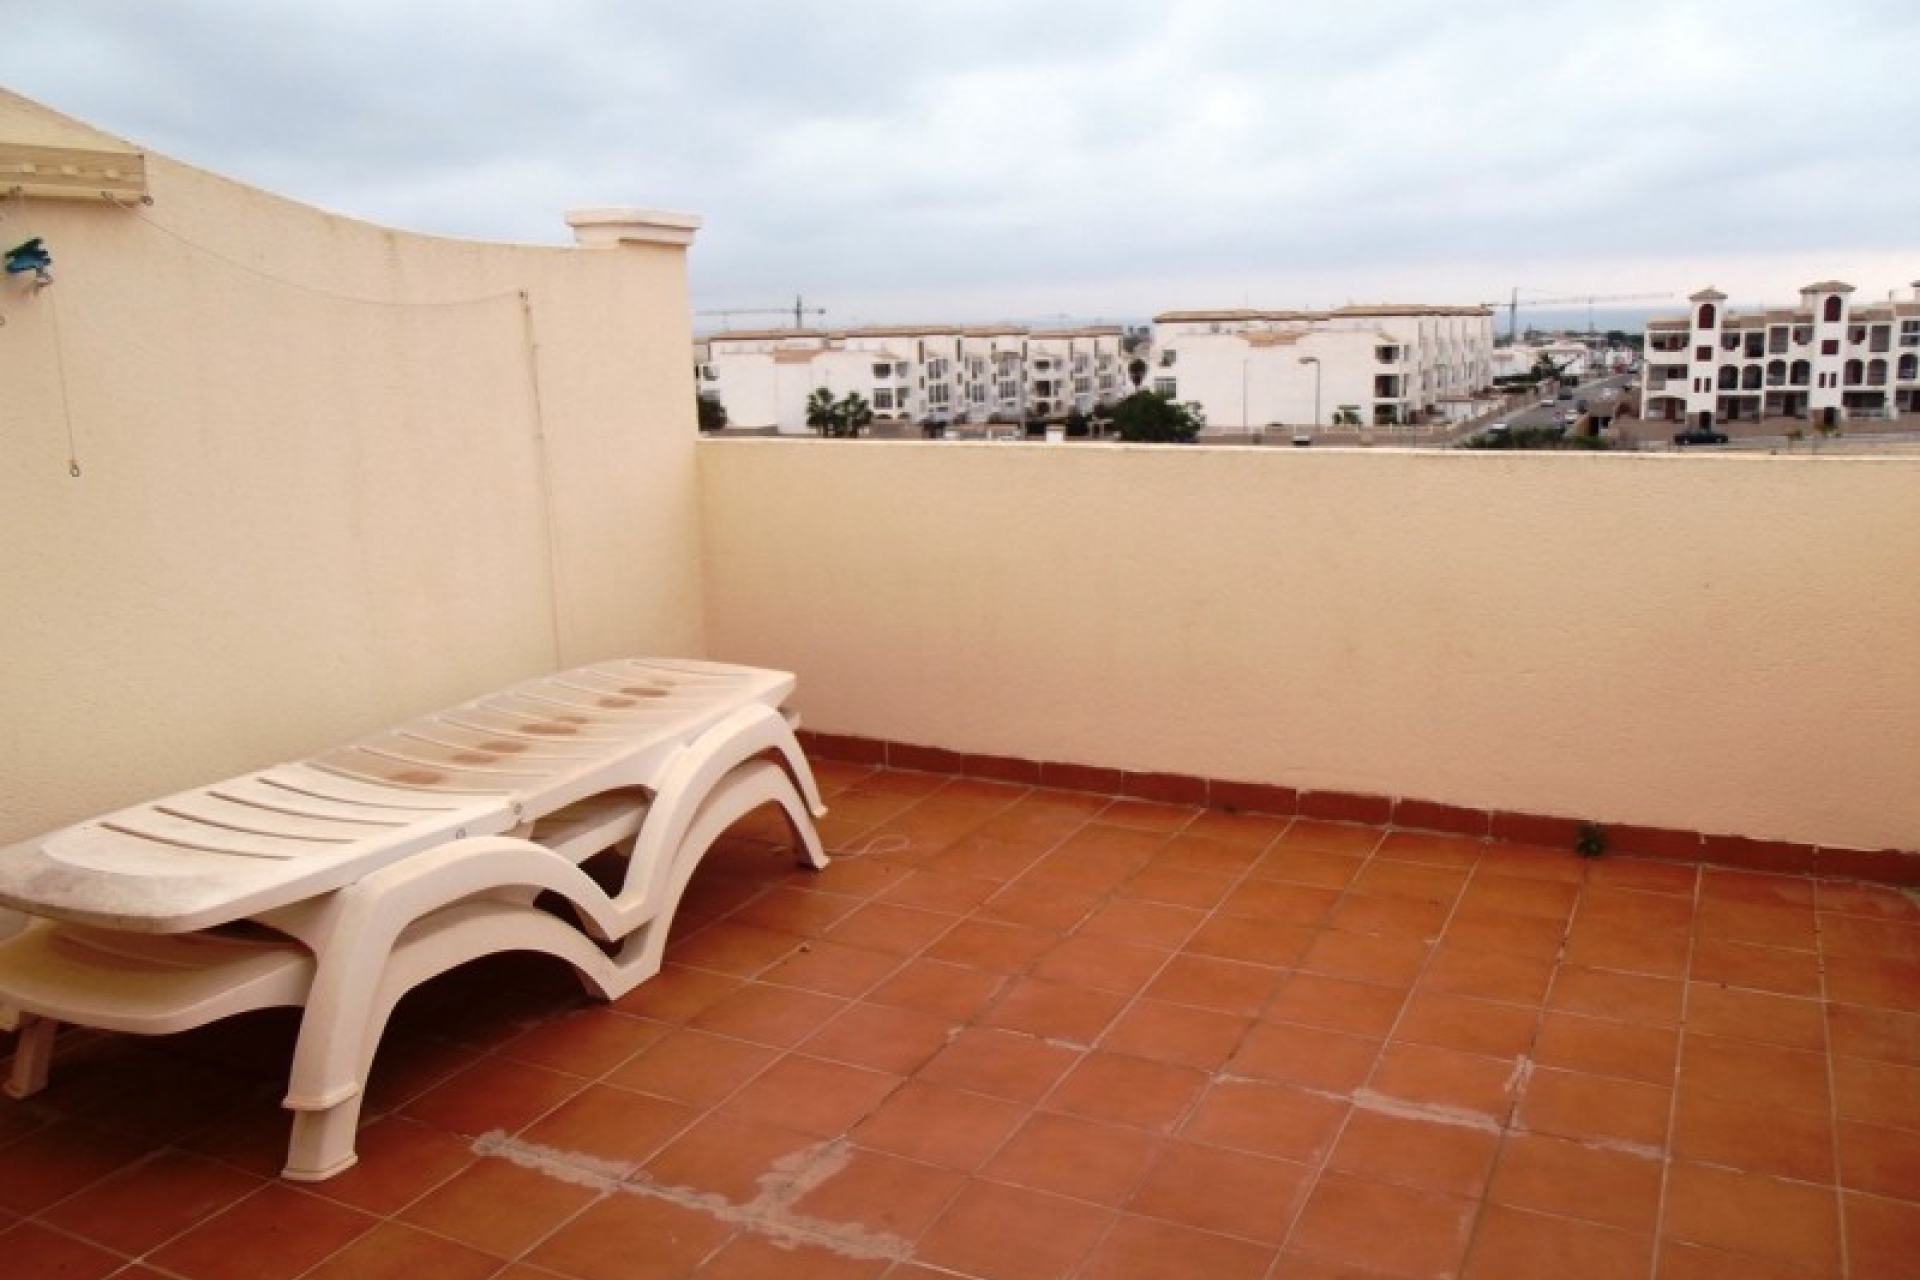 Property for sale costa blanca Spain cheap bargain